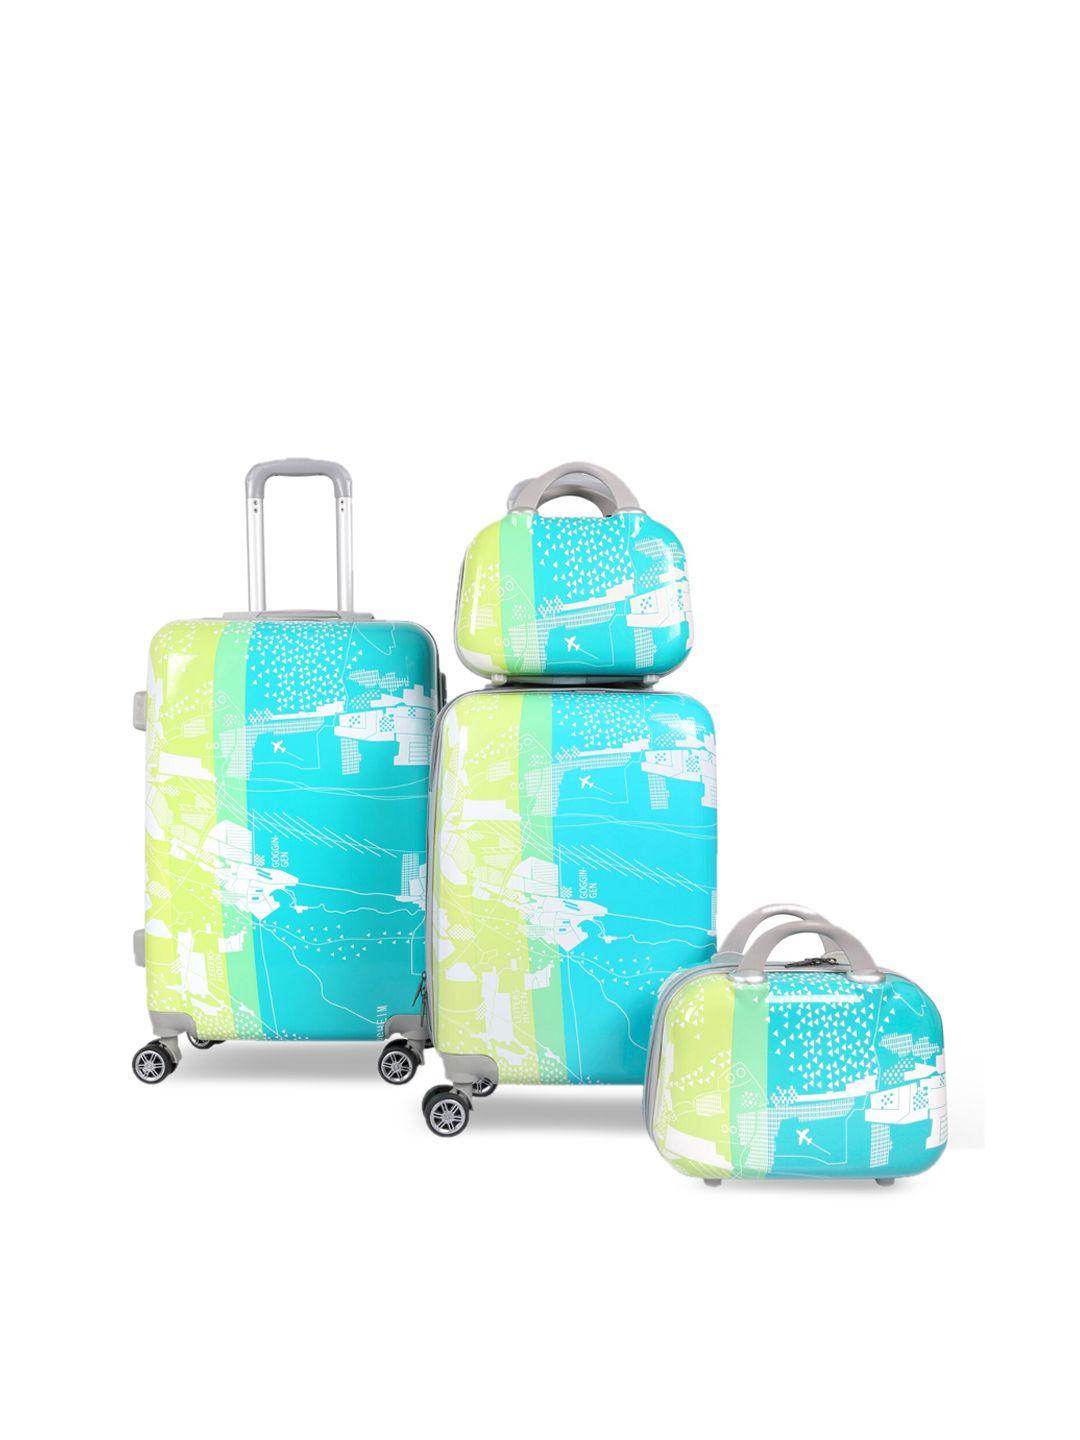 polo class green & blue 4-pieces printed hard case luggage trolley & vanity bag set